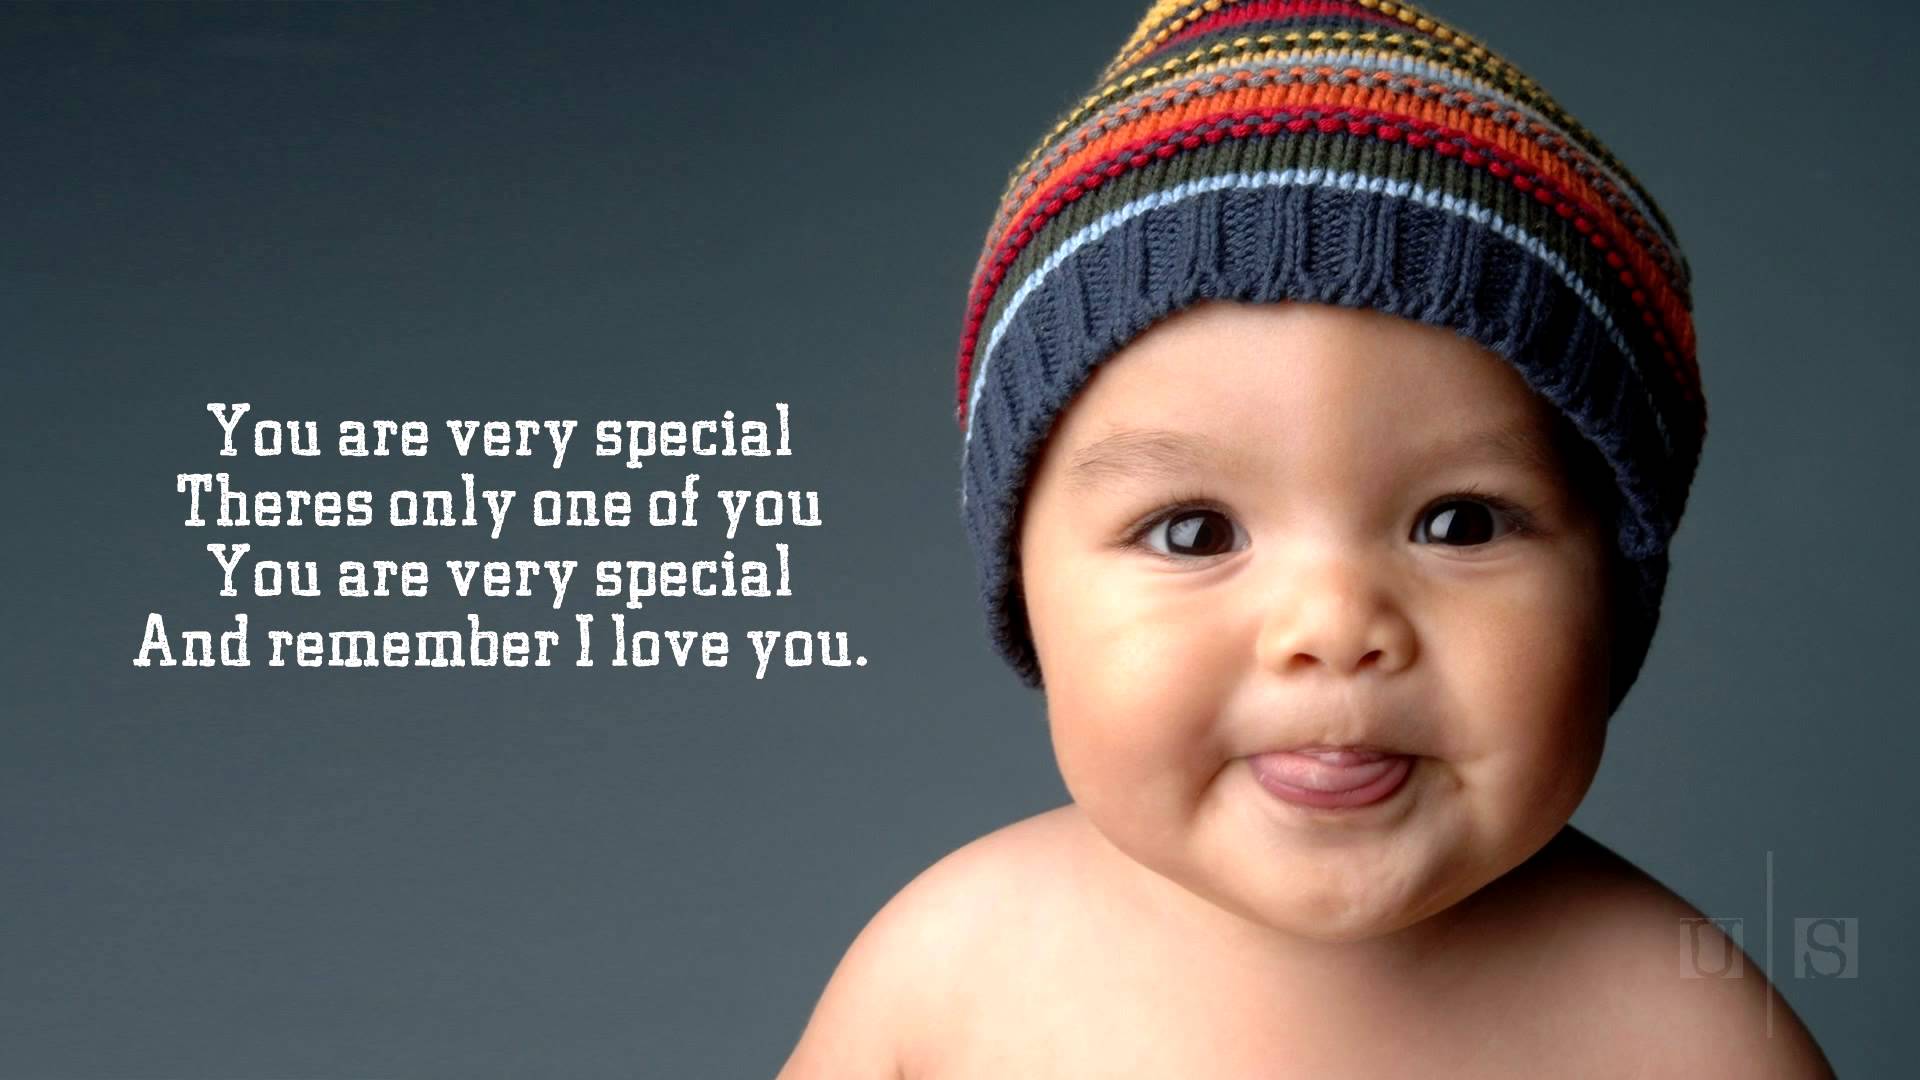 You Are Very Special There Only One Of You, You Are Very Special And Remember I Love You Cute Kid Picture